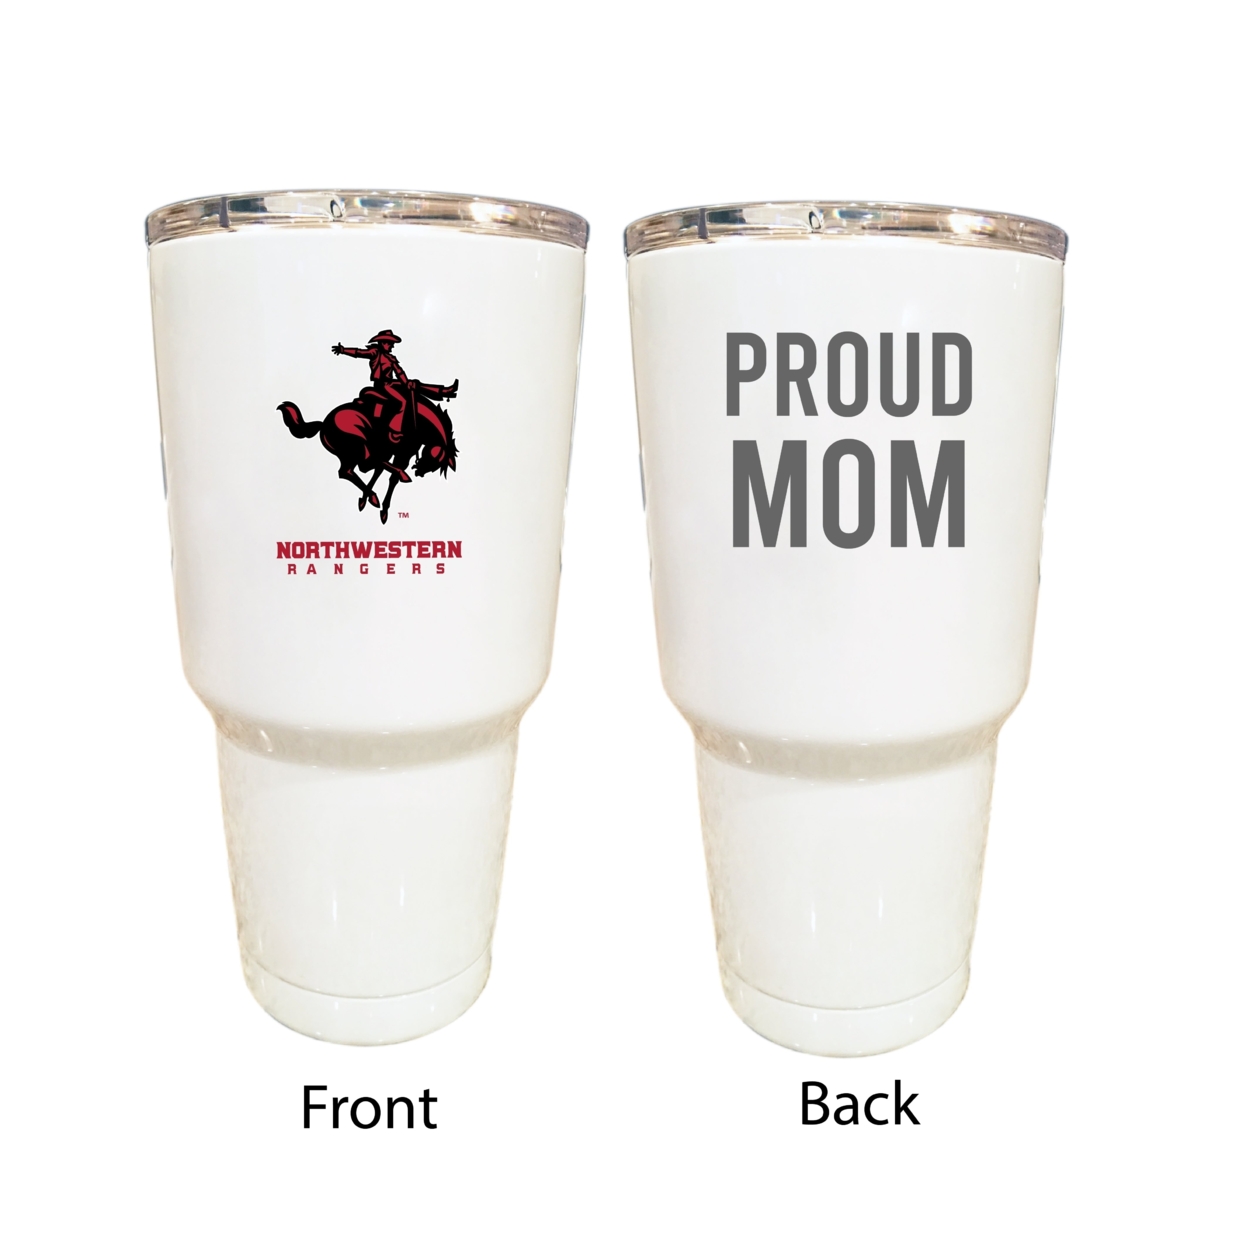 Northwestern Oklahoma State University Proud Mom 24 Oz Insulated Stainless Steel Tumblers Choose Your Color.